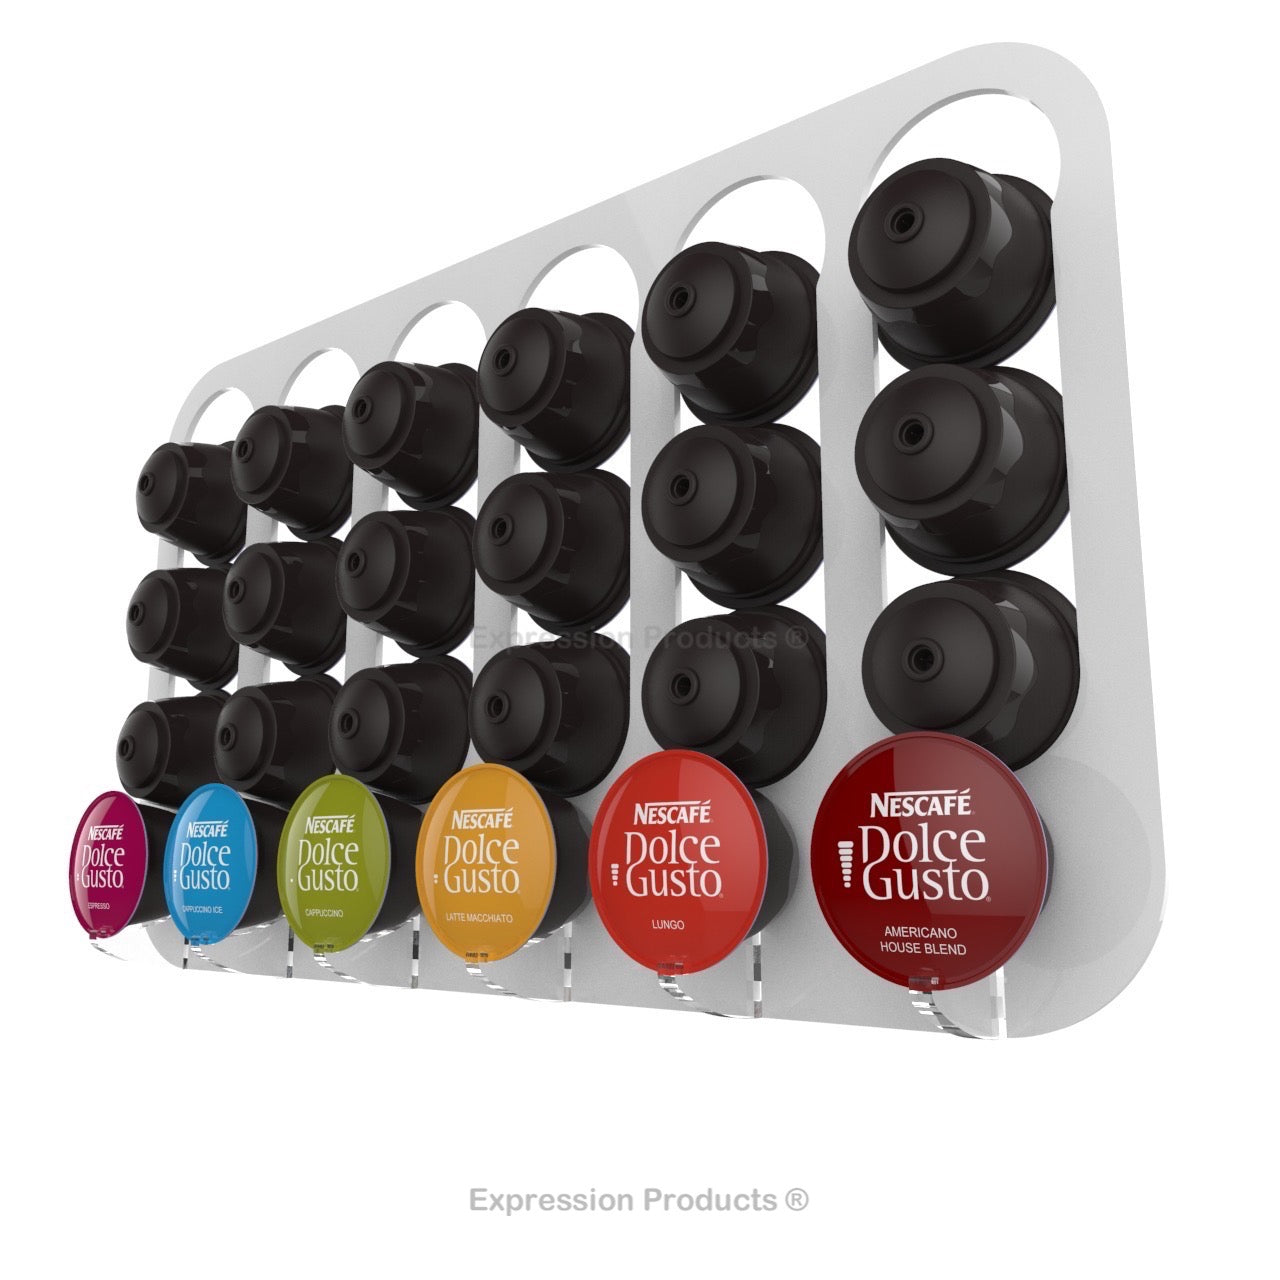 Dolce gusto coffee pod holder, wall mounted, half height.  Shown in white holding 24 pods